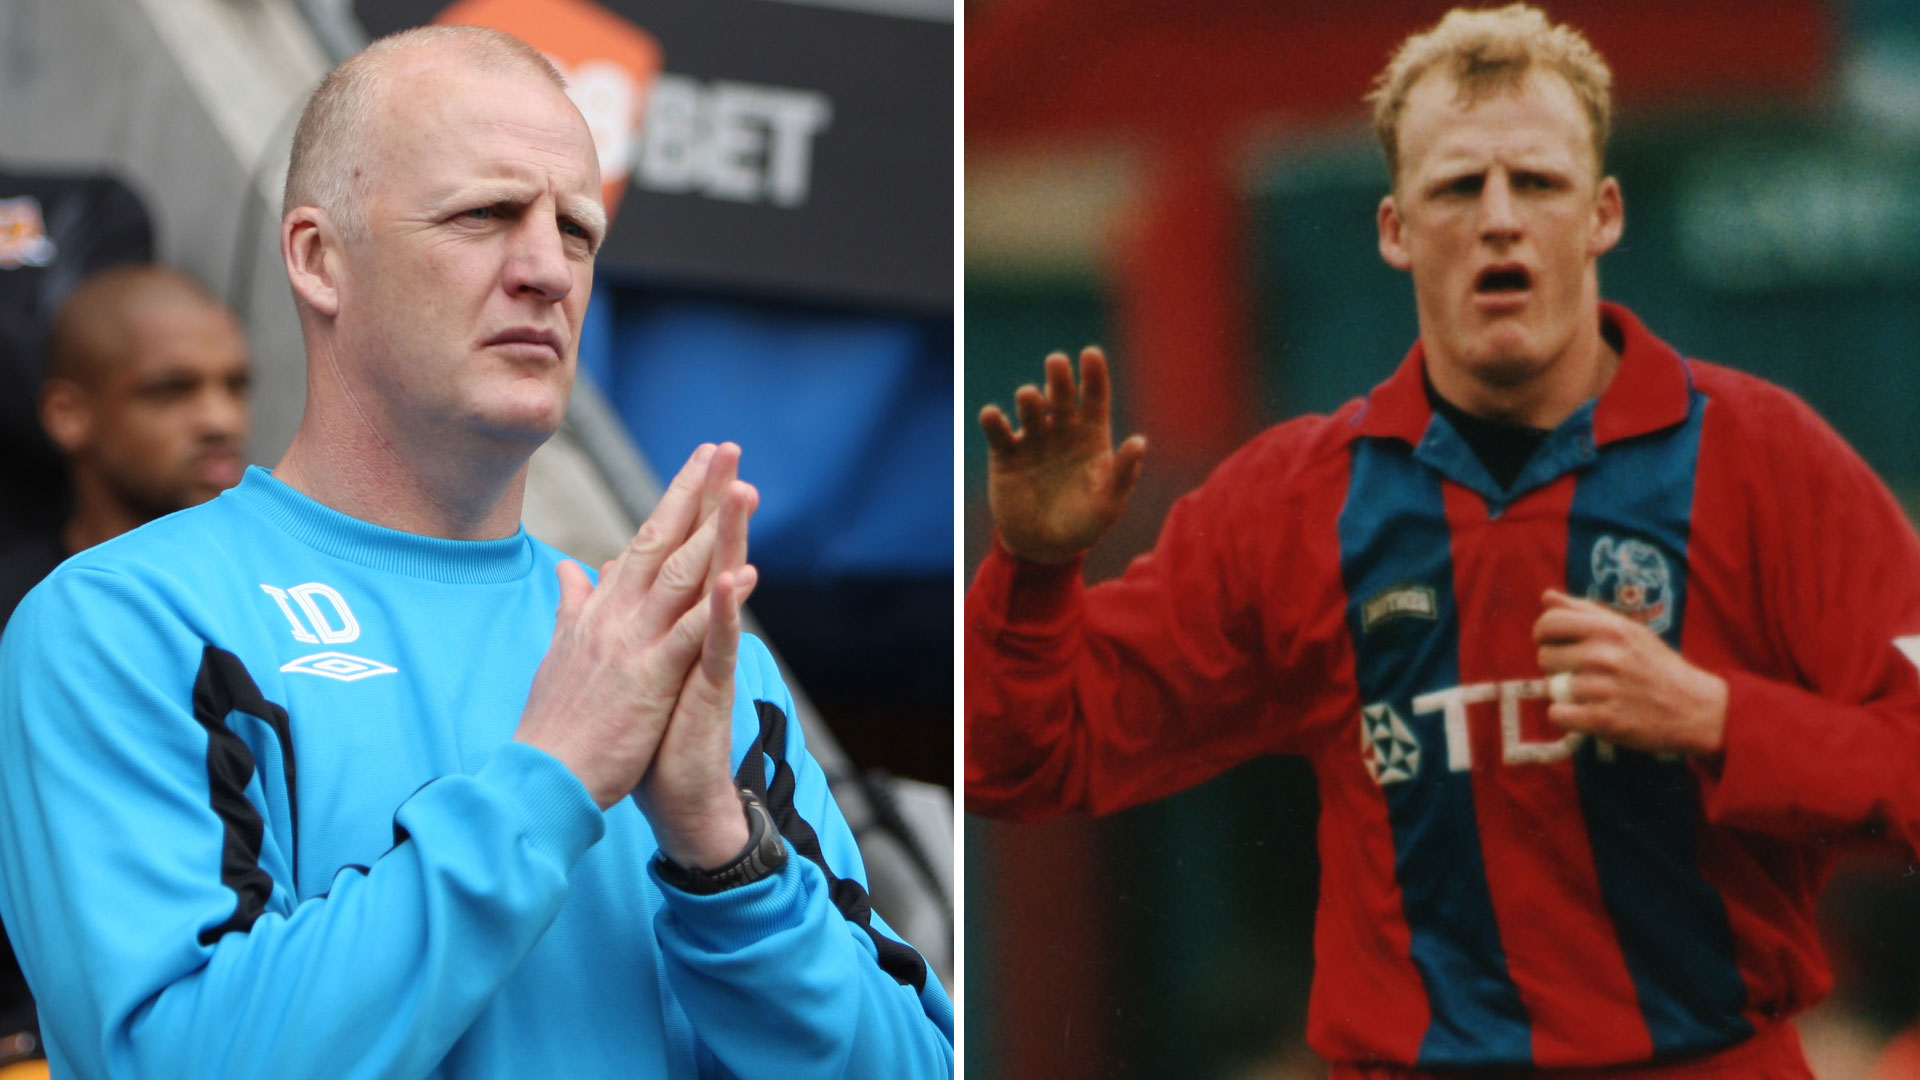 Ex-Prem boss Dowie lucky to be alive after cardiac arrest during spin class